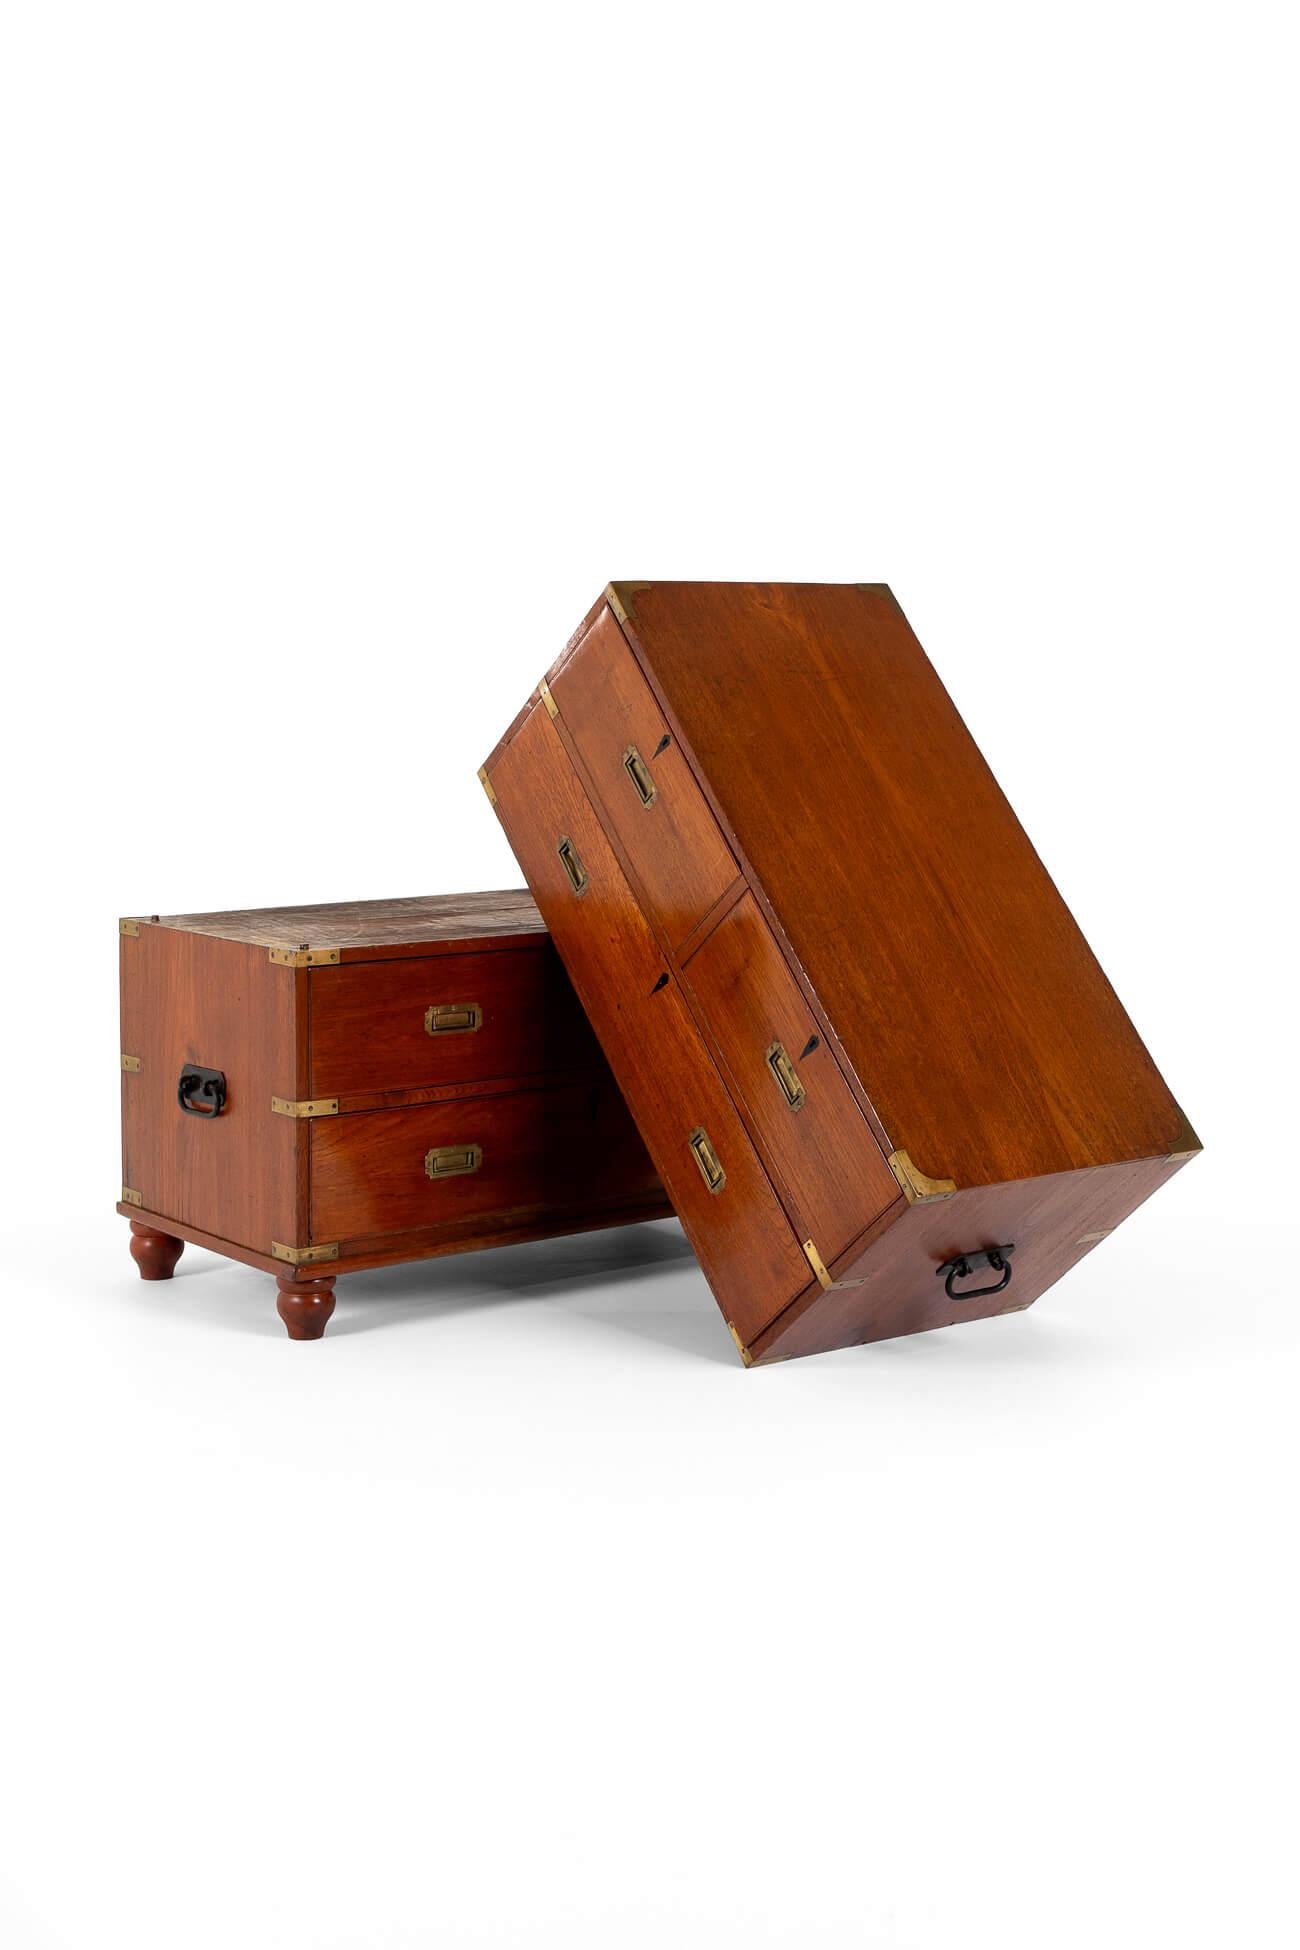 High Victorian 19th Century Teak Campaign Chest For Sale